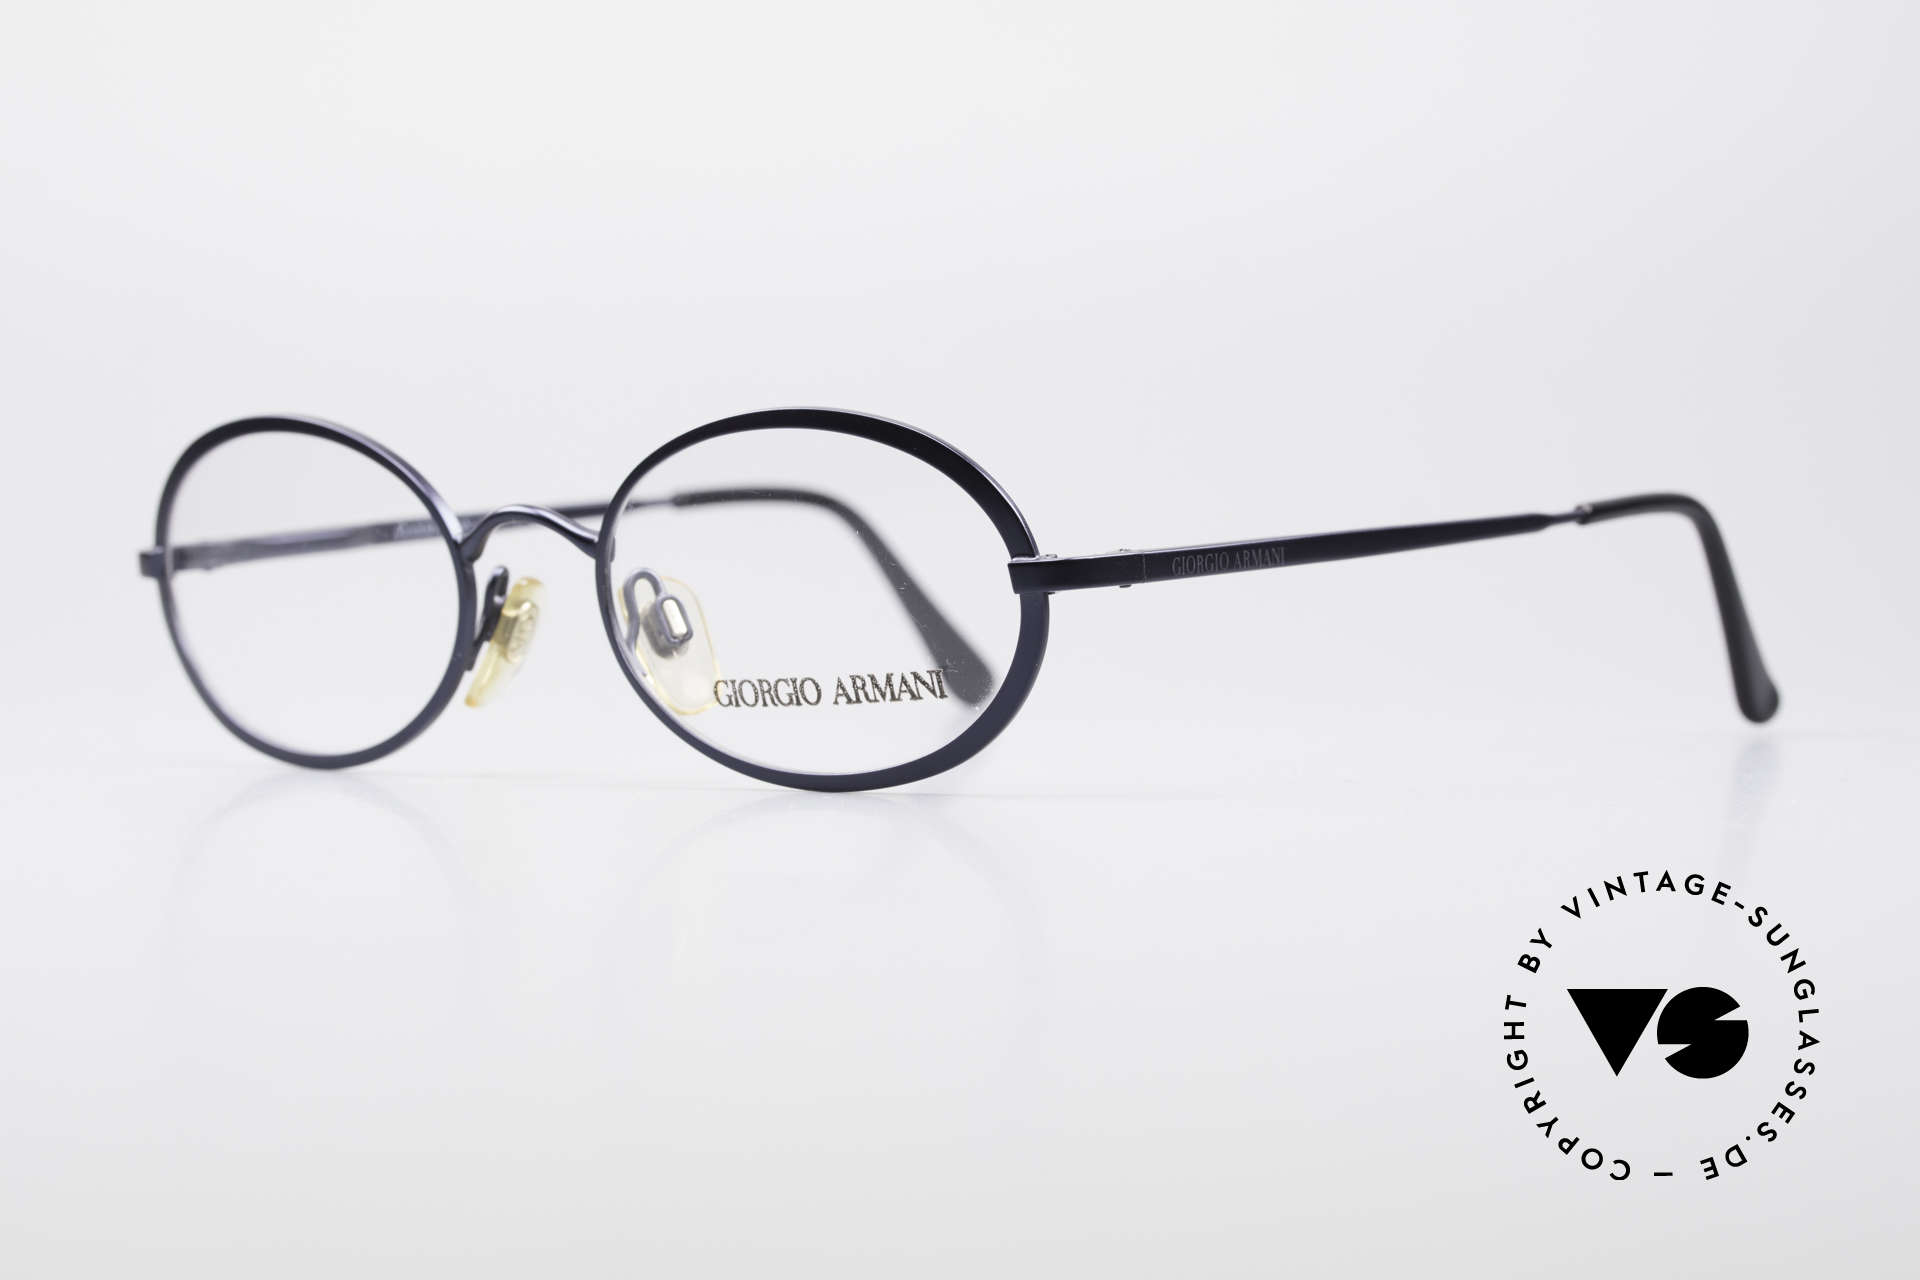 Giorgio Armani 277 90's Oval Vintage Eyeglasses, deep blue frame finish and flexible spring hinges, Made for Men and Women